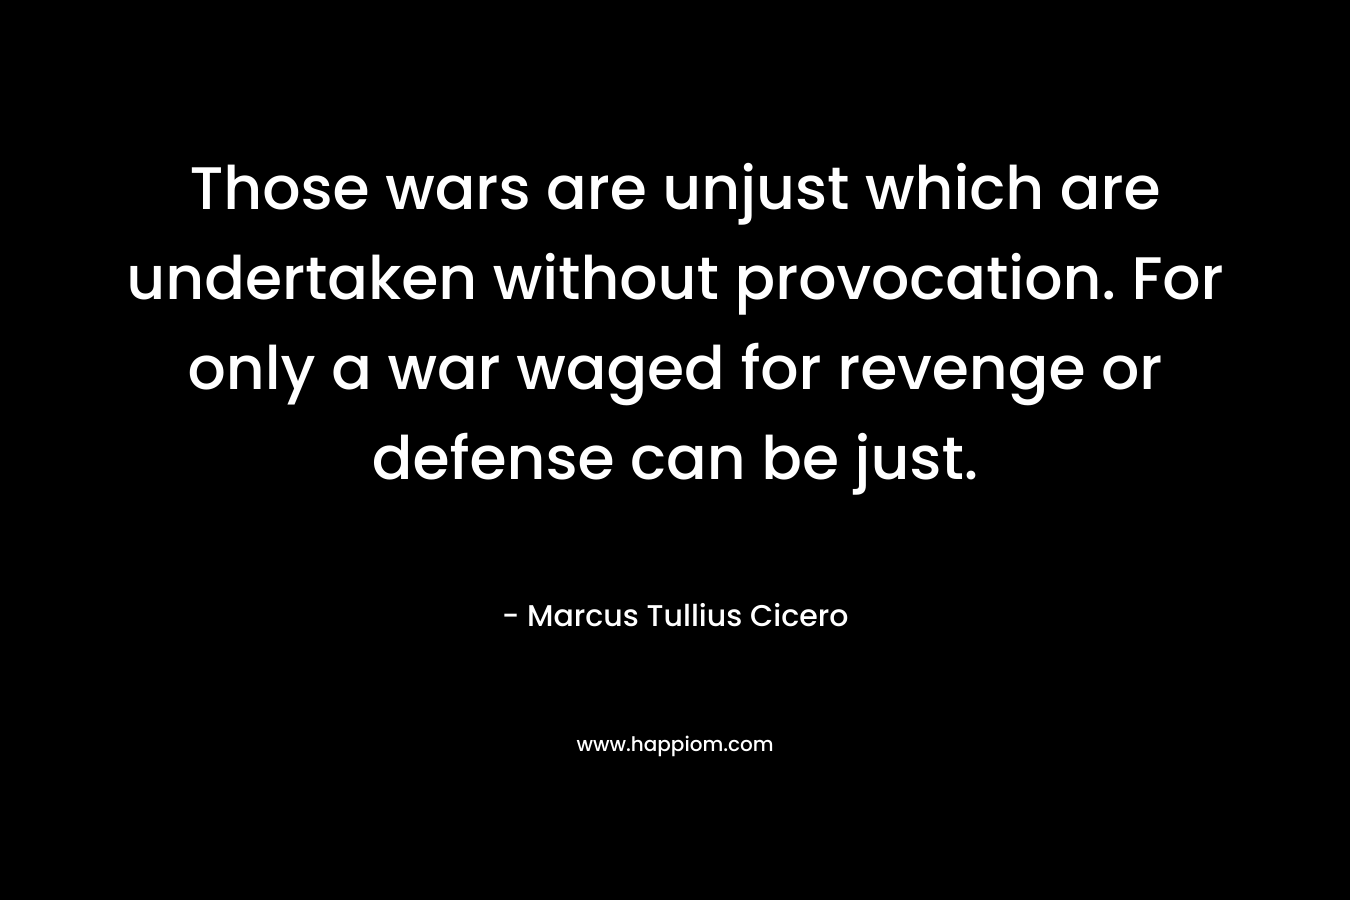 Those wars are unjust which are undertaken without provocation. For only a war waged for revenge or defense can be just.